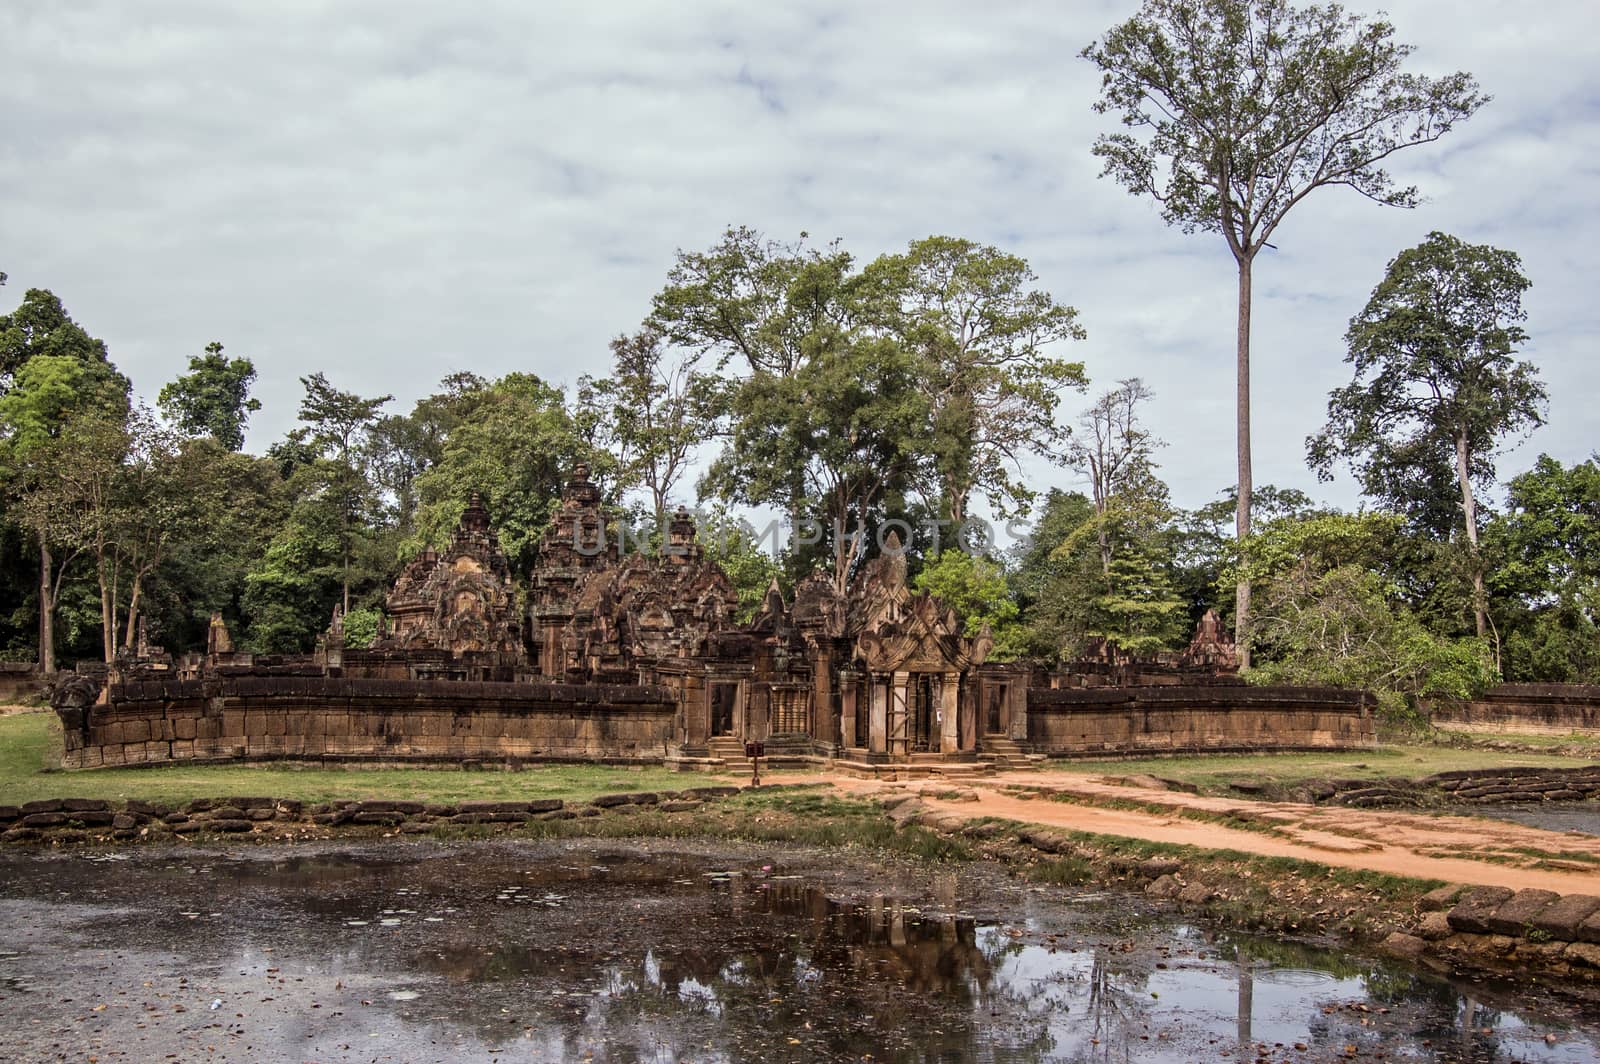 Beautiful temple of Banteay Srei, Cambodia. Part of the Angkor World Heritage Site near Siem Reap. Built in the 10th century from carved red sandstone.